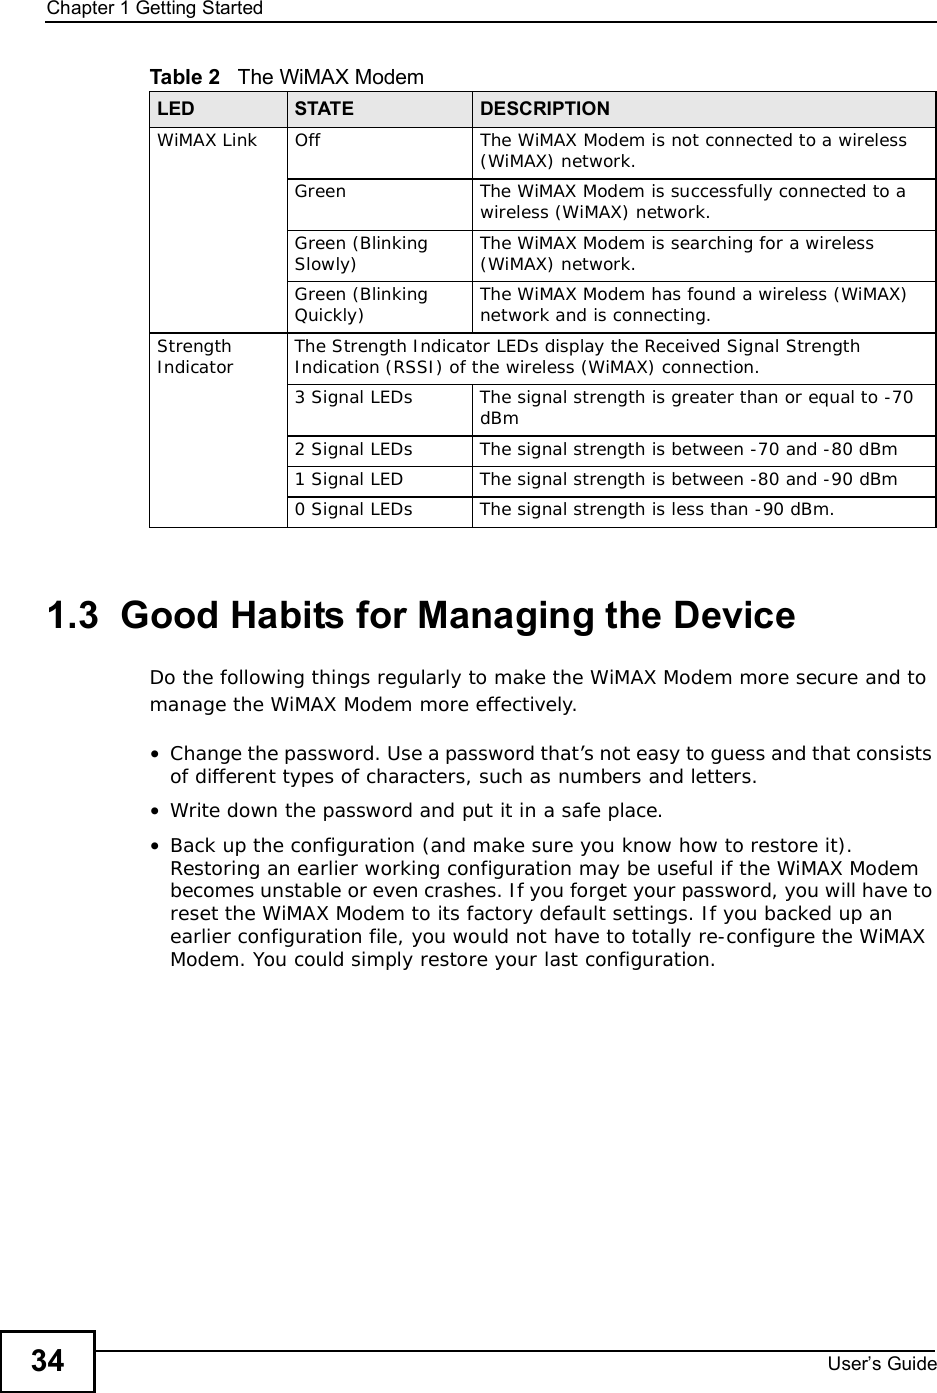 Chapter 1Getting StartedUser s Guide341.3  Good Habits for Managing the DeviceDo the following things regularly to make the WiMAX Modem more secure and to manage the WiMAX Modem more effectively.•Change the password. Use a password that’s not easy to guess and that consists of different types of characters, such as numbers and letters.•Write down the password and put it in a safe place.•Back up the configuration (and make sure you know how to restore it). Restoring an earlier working configuration may be useful if the WiMAX Modem becomes unstable or even crashes. If you forget your password, you will have to reset the WiMAX Modem to its factory default settings. If you backed up an earlier configuration file, you would not have to totally re-configure the WiMAX Modem. You could simply restore your last configuration.WiMAX LinkOffThe WiMAX Modem is not connected to a wireless (WiMAX) network.GreenThe WiMAX Modem is successfully connected to a wireless (WiMAX) network.Green (Blinking Slowly) The WiMAX Modem is searching for a wireless (WiMAX) network.Green (Blinking Quickly) The WiMAX Modem has found a wireless (WiMAX) network and is connecting.StrengthIndicator The Strength Indicator LEDs display the Received Signal Strength Indication (RSSI) of the wireless (WiMAX) connection. 3 Signal LEDsThe signal strength is greater than or equal to -70 dBm2 Signal LEDsThe signal strength is between -70 and -80 dBm1 Signal LEDThe signal strength is between -80 and -90 dBm0 Signal LEDsThe signal strength is less than -90 dBm.Table 2   The WiMAX ModemLED STATE DESCRIPTION